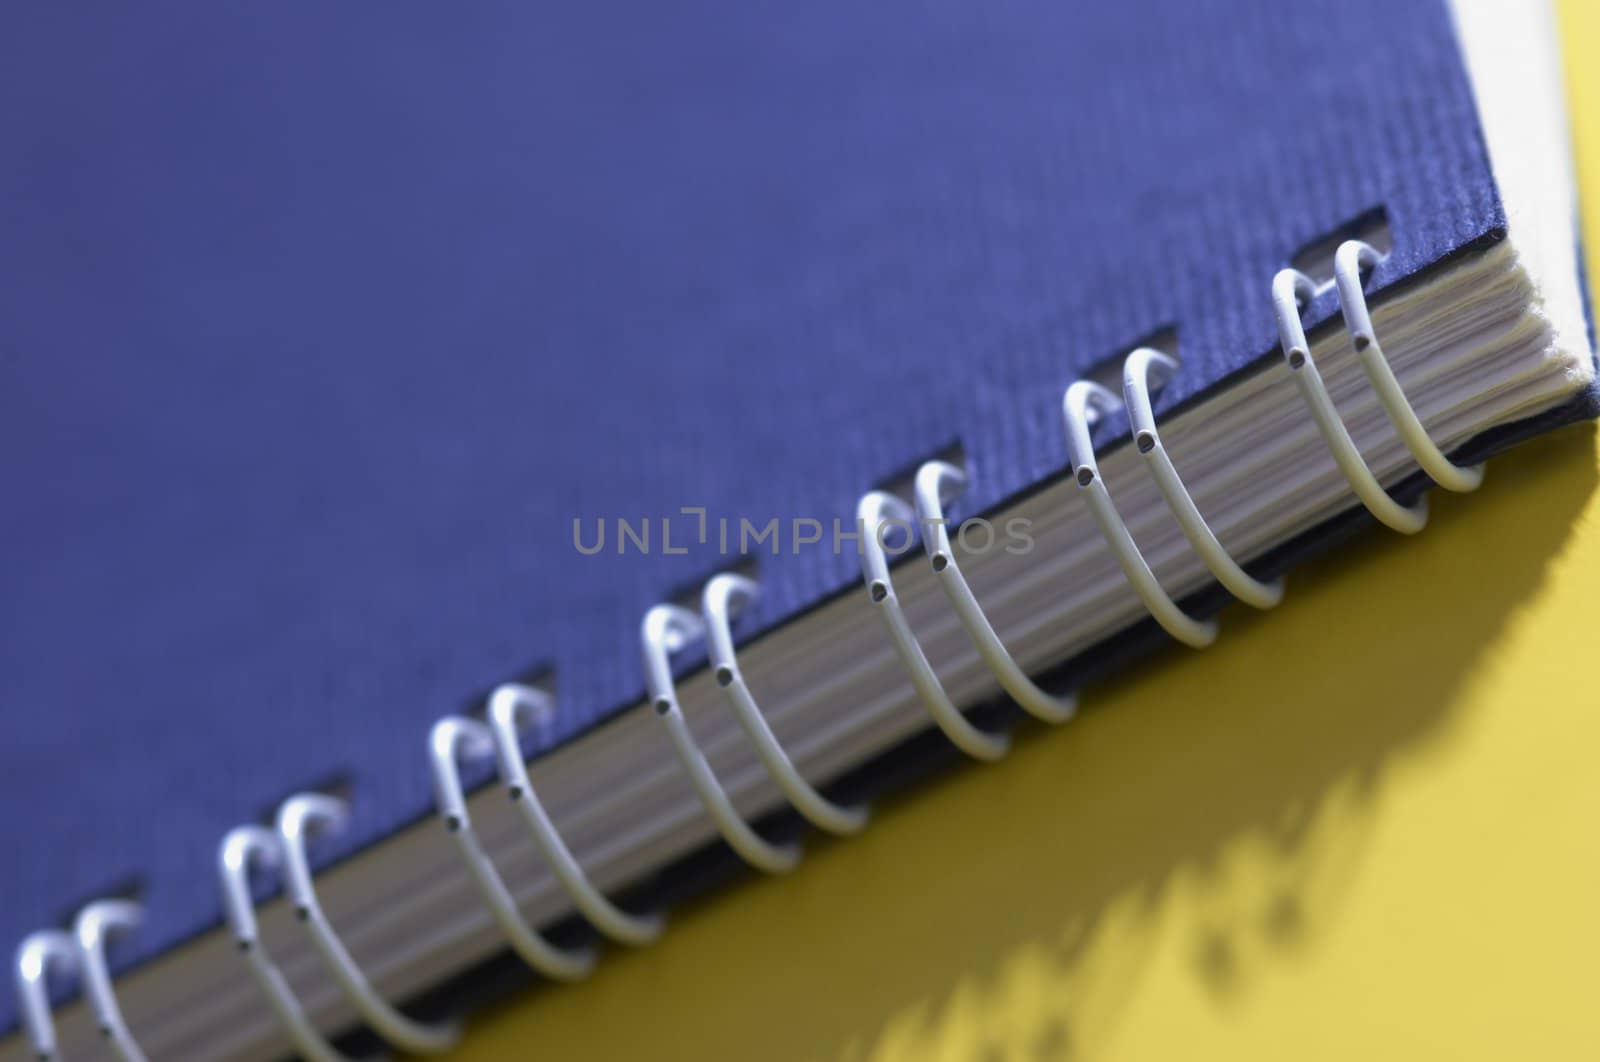 notebook in close-up by Kuzma